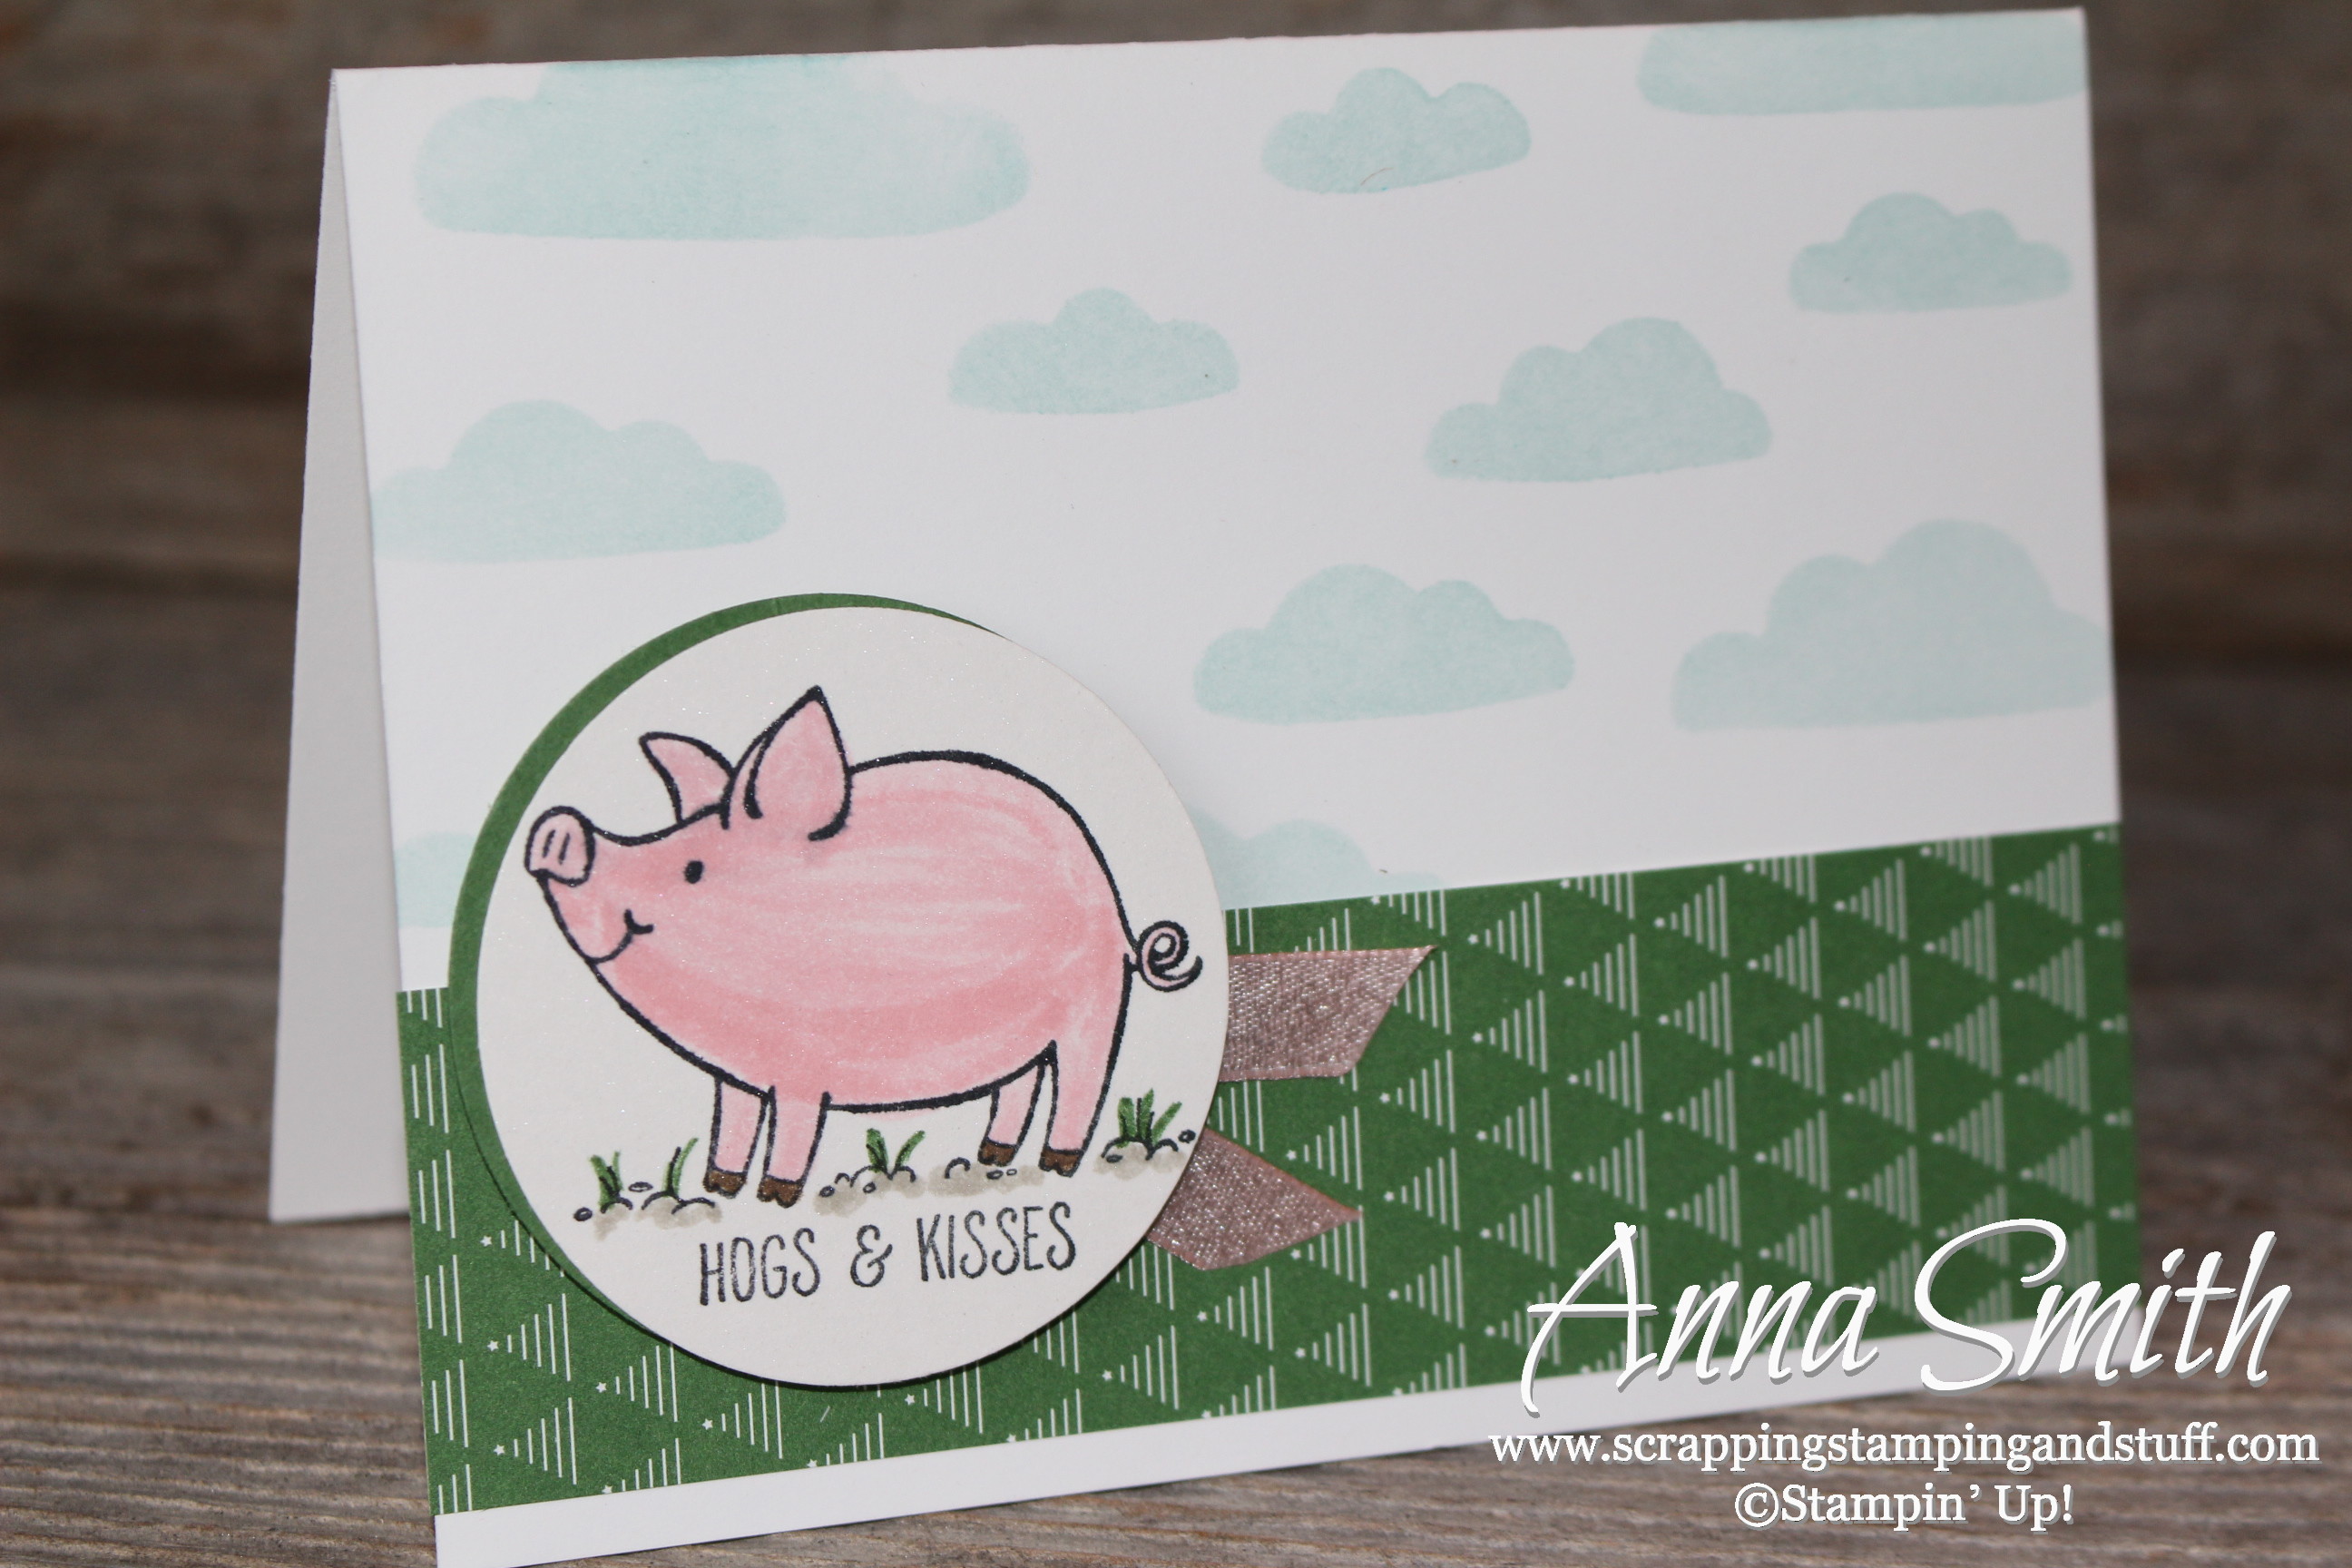 Hogs & Kisses with Stampin’ Up! This Little Piggy